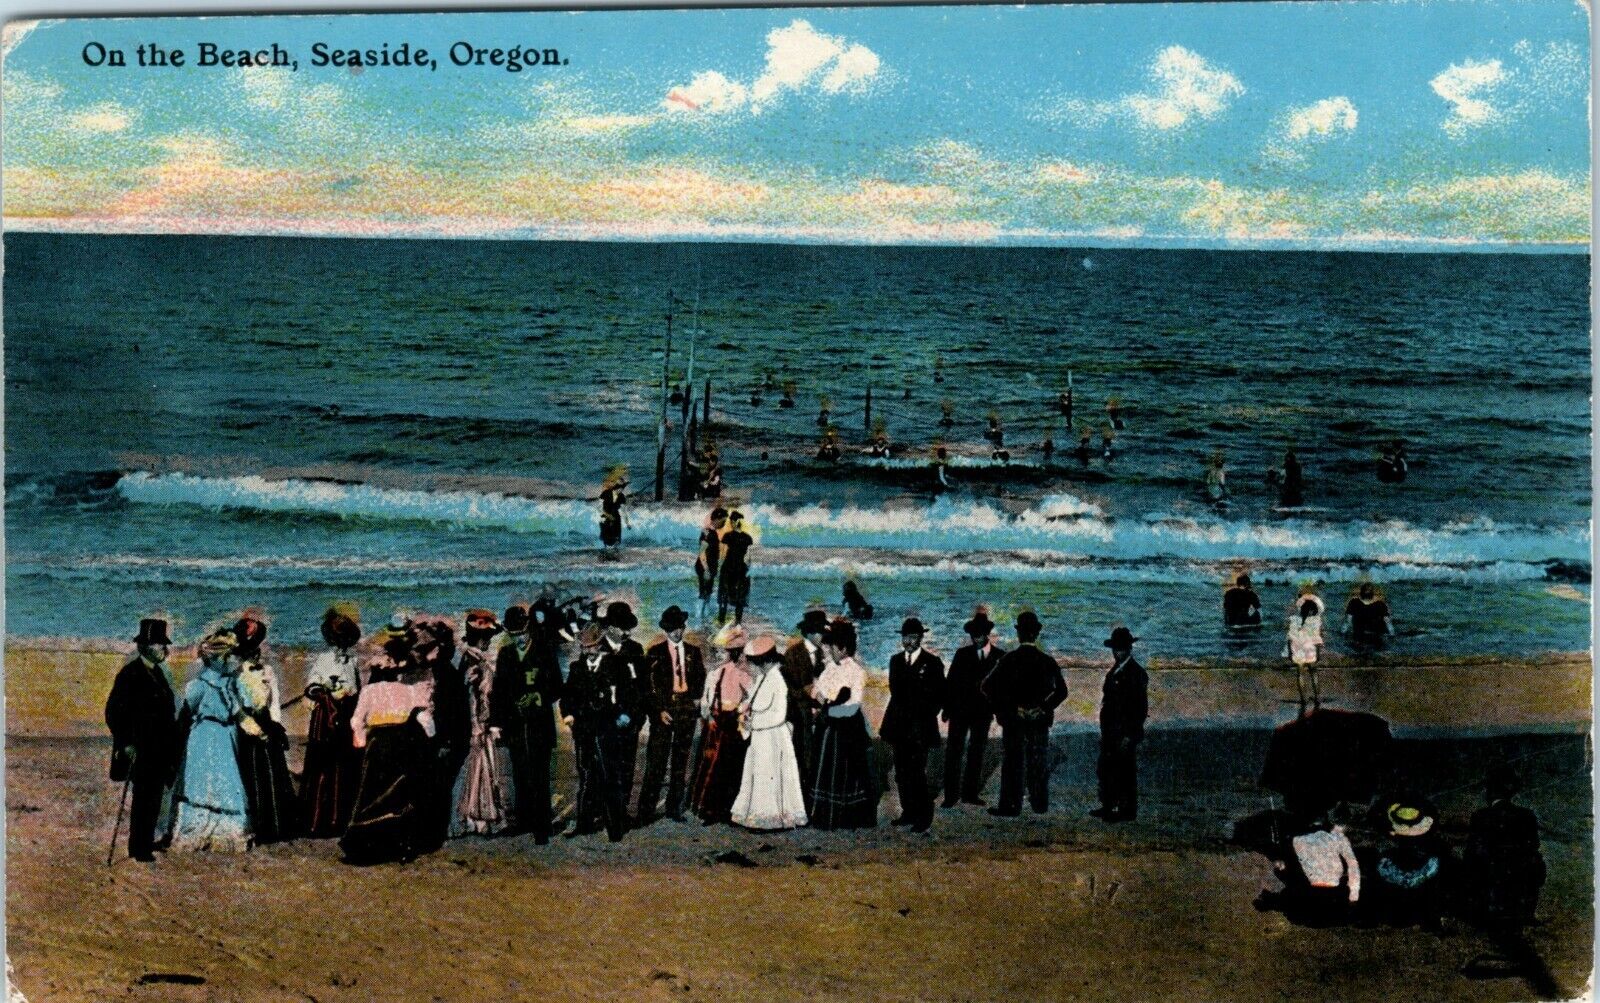 SEASIDE OREGON 1910s ANTIQUE POSTCARD LARGE GROUP ON THE BEACH EARLY SWIMWEAR H8